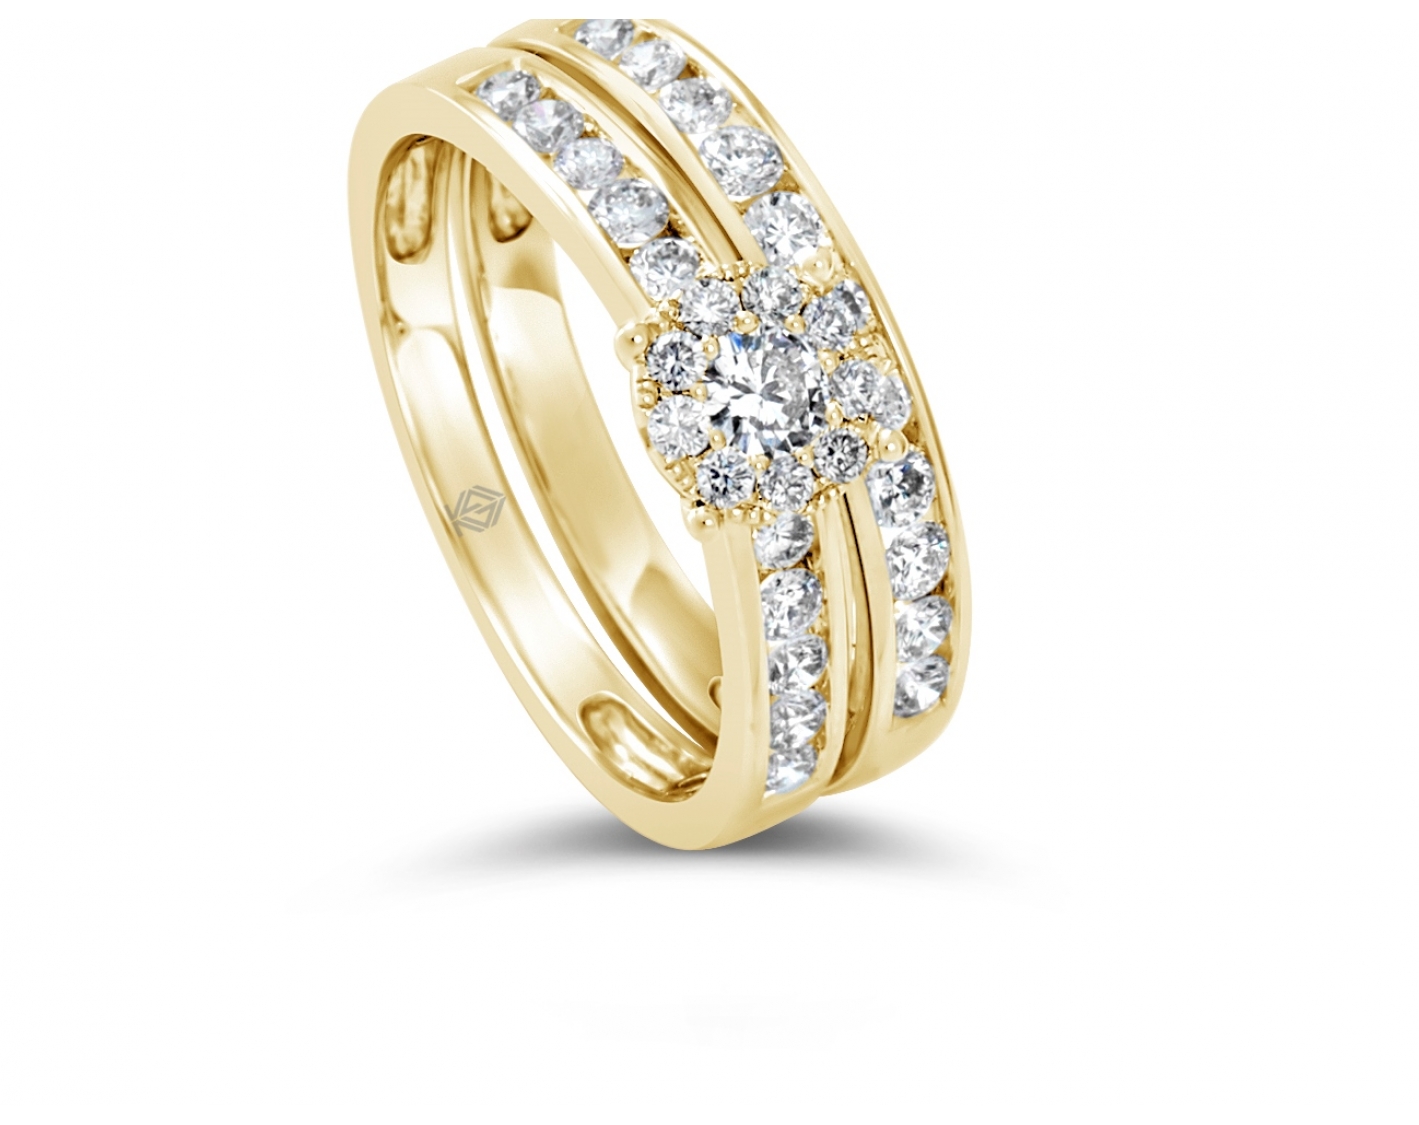 18k yellow gold halo illusion set engagement ring & matching wedding band in channel set (2 rings)